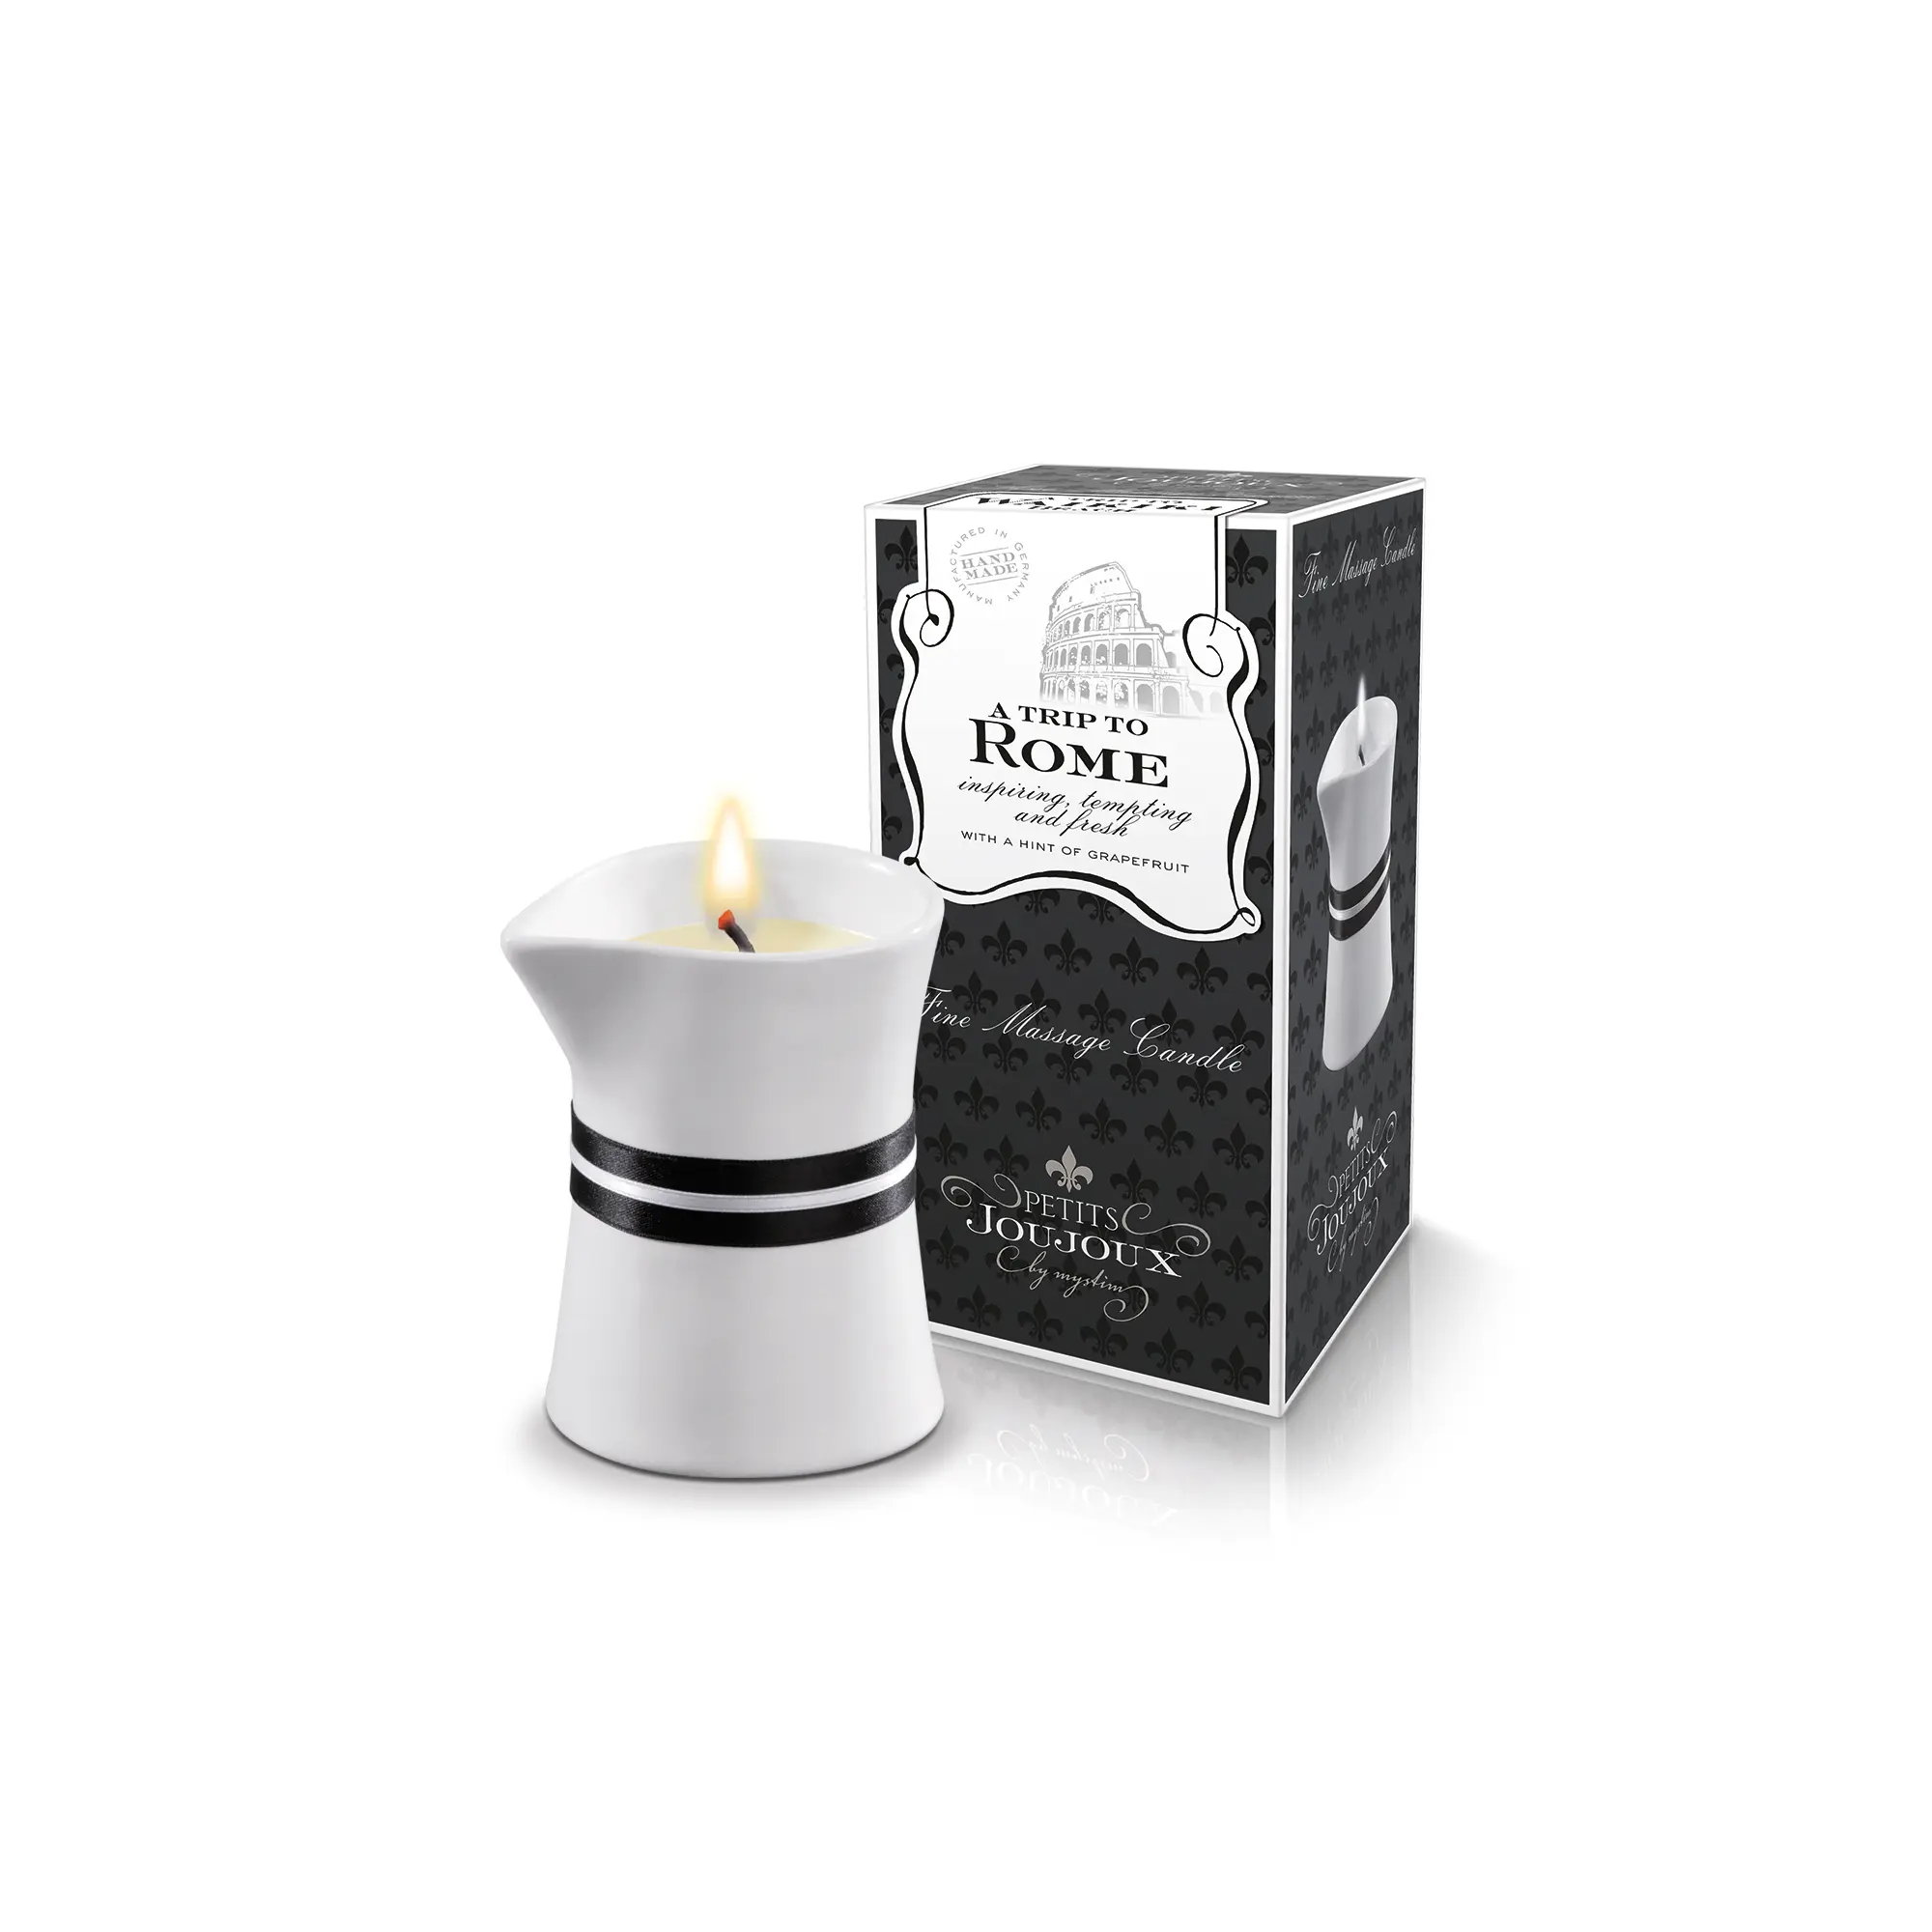 A trip to Rome - Candle 4.23 oz